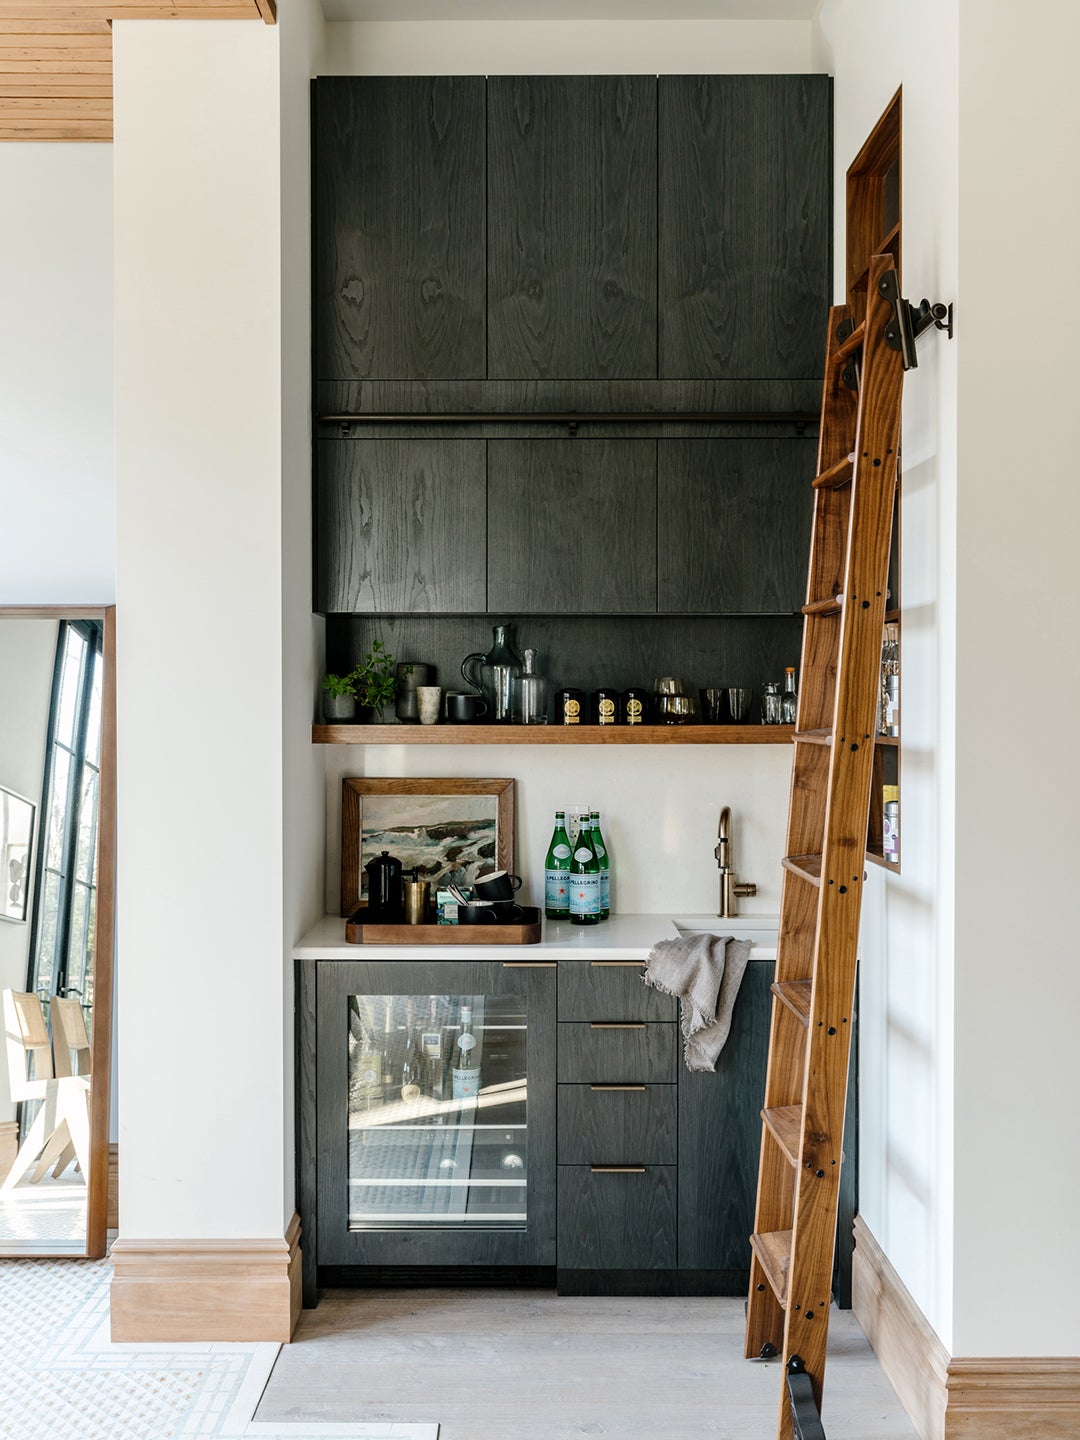 Black kitchen cabinets with a ladder